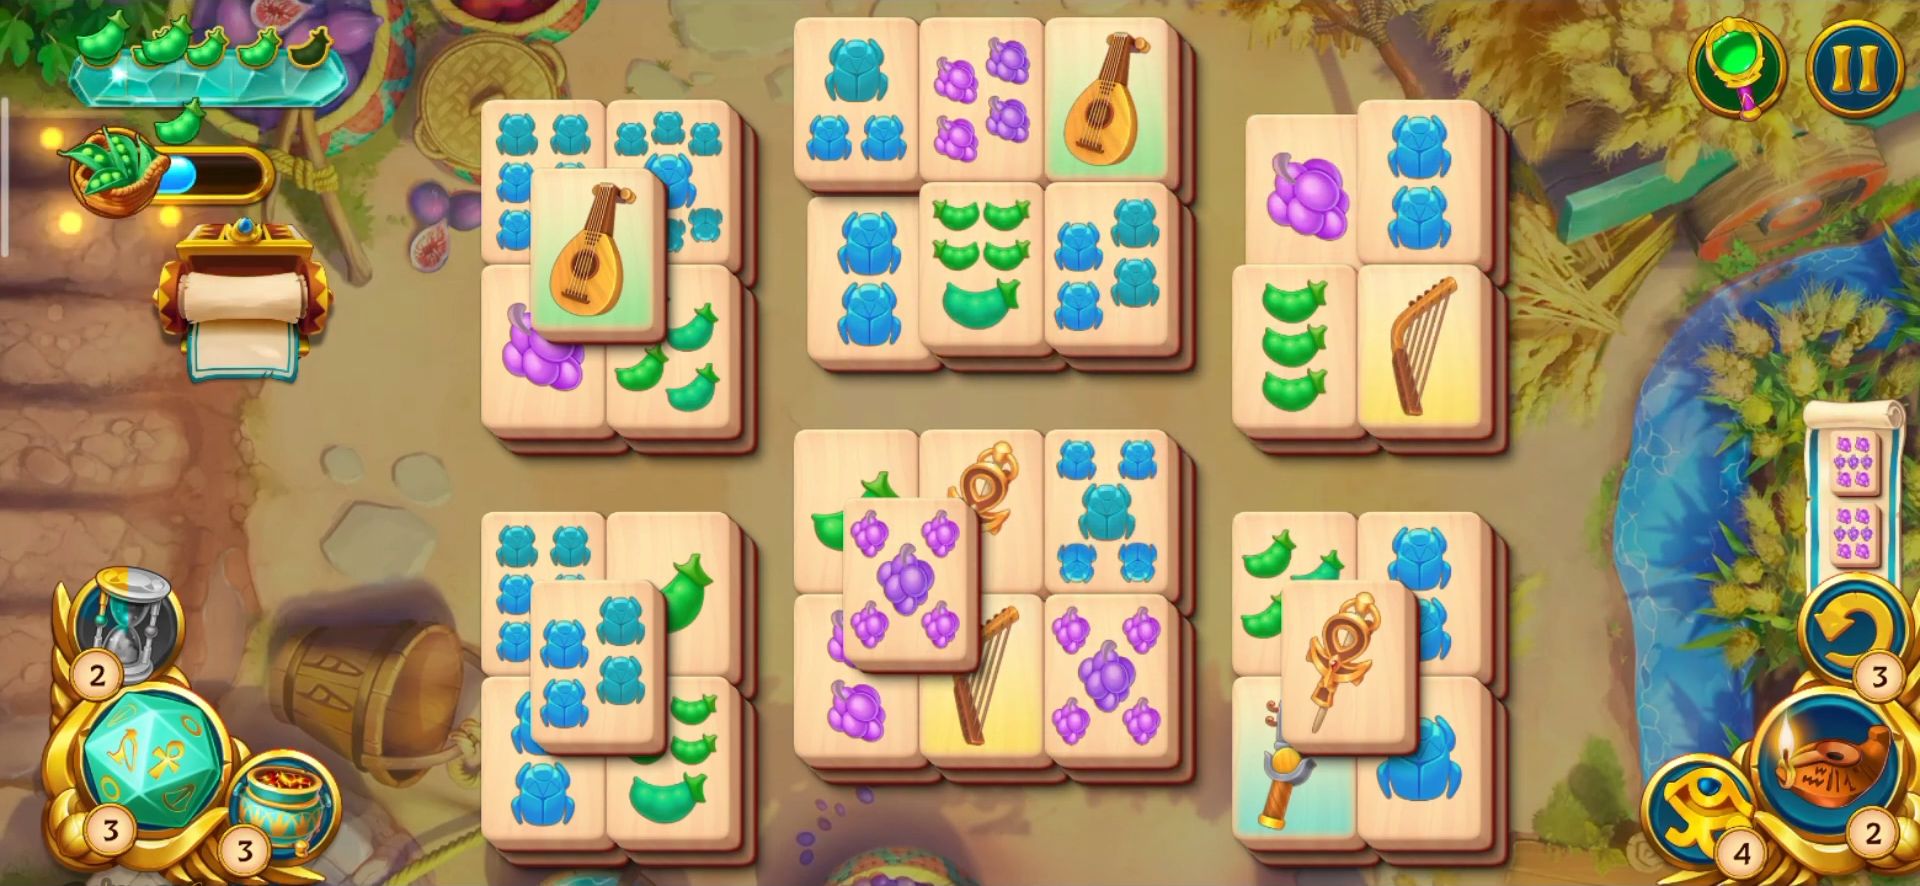 Mahjong Journey: Tile Matching Puzzle free instals